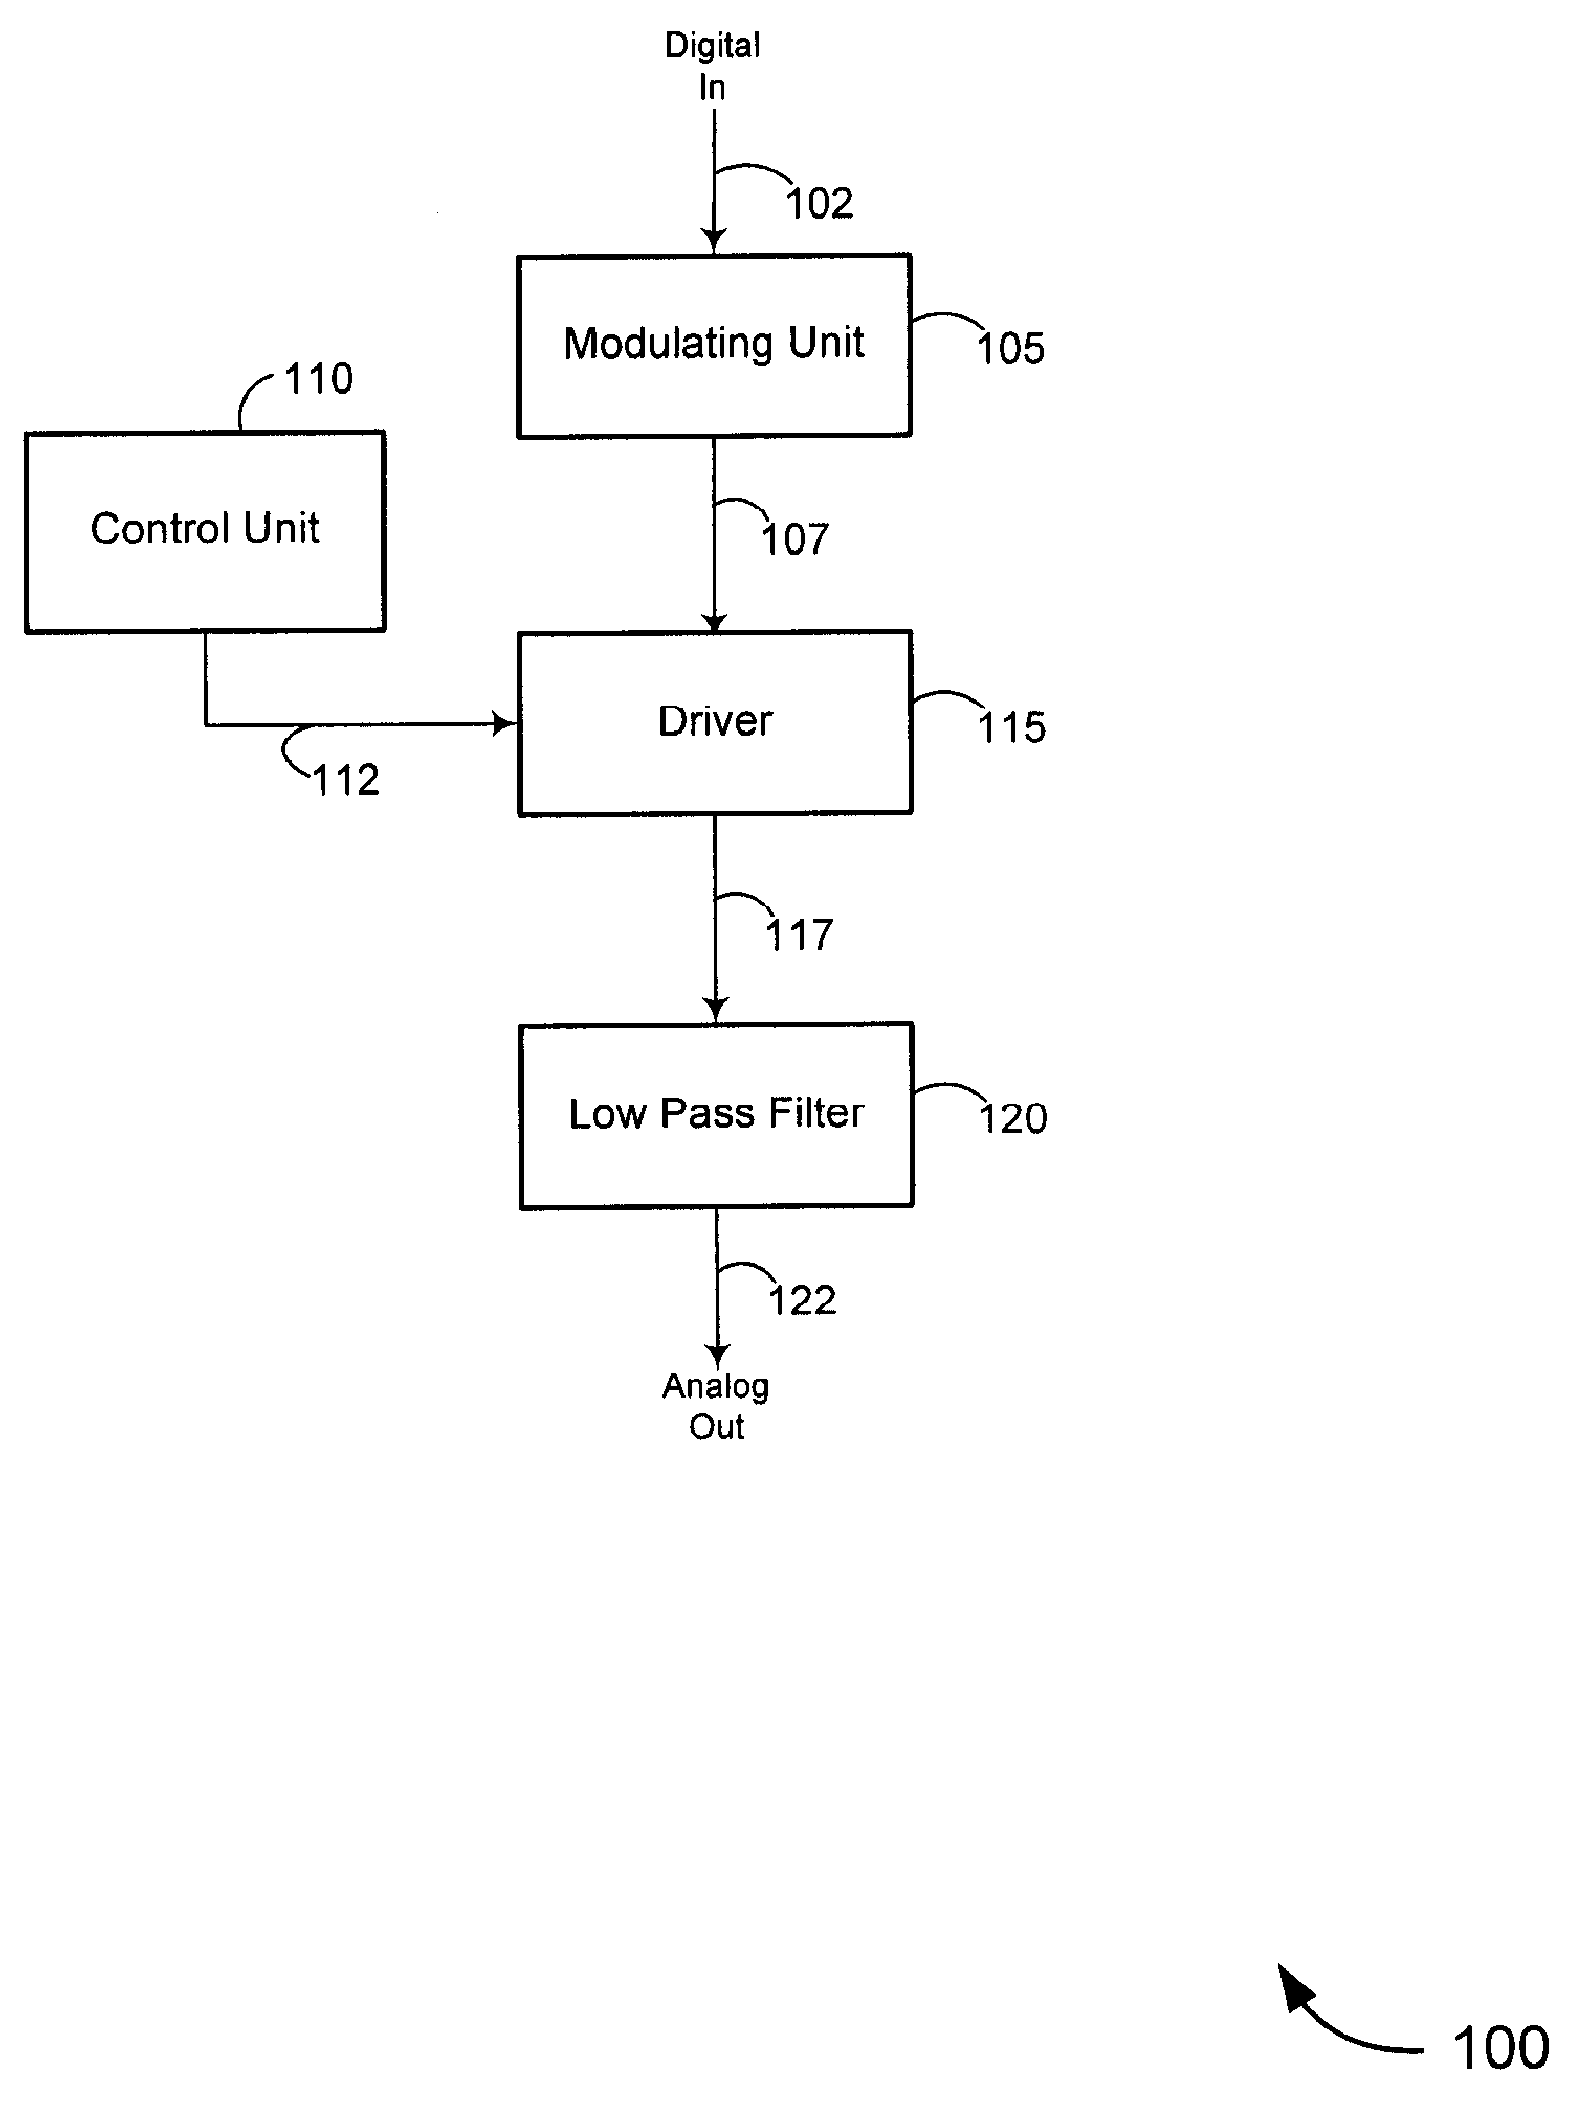 Single bit DAC with tristate driver